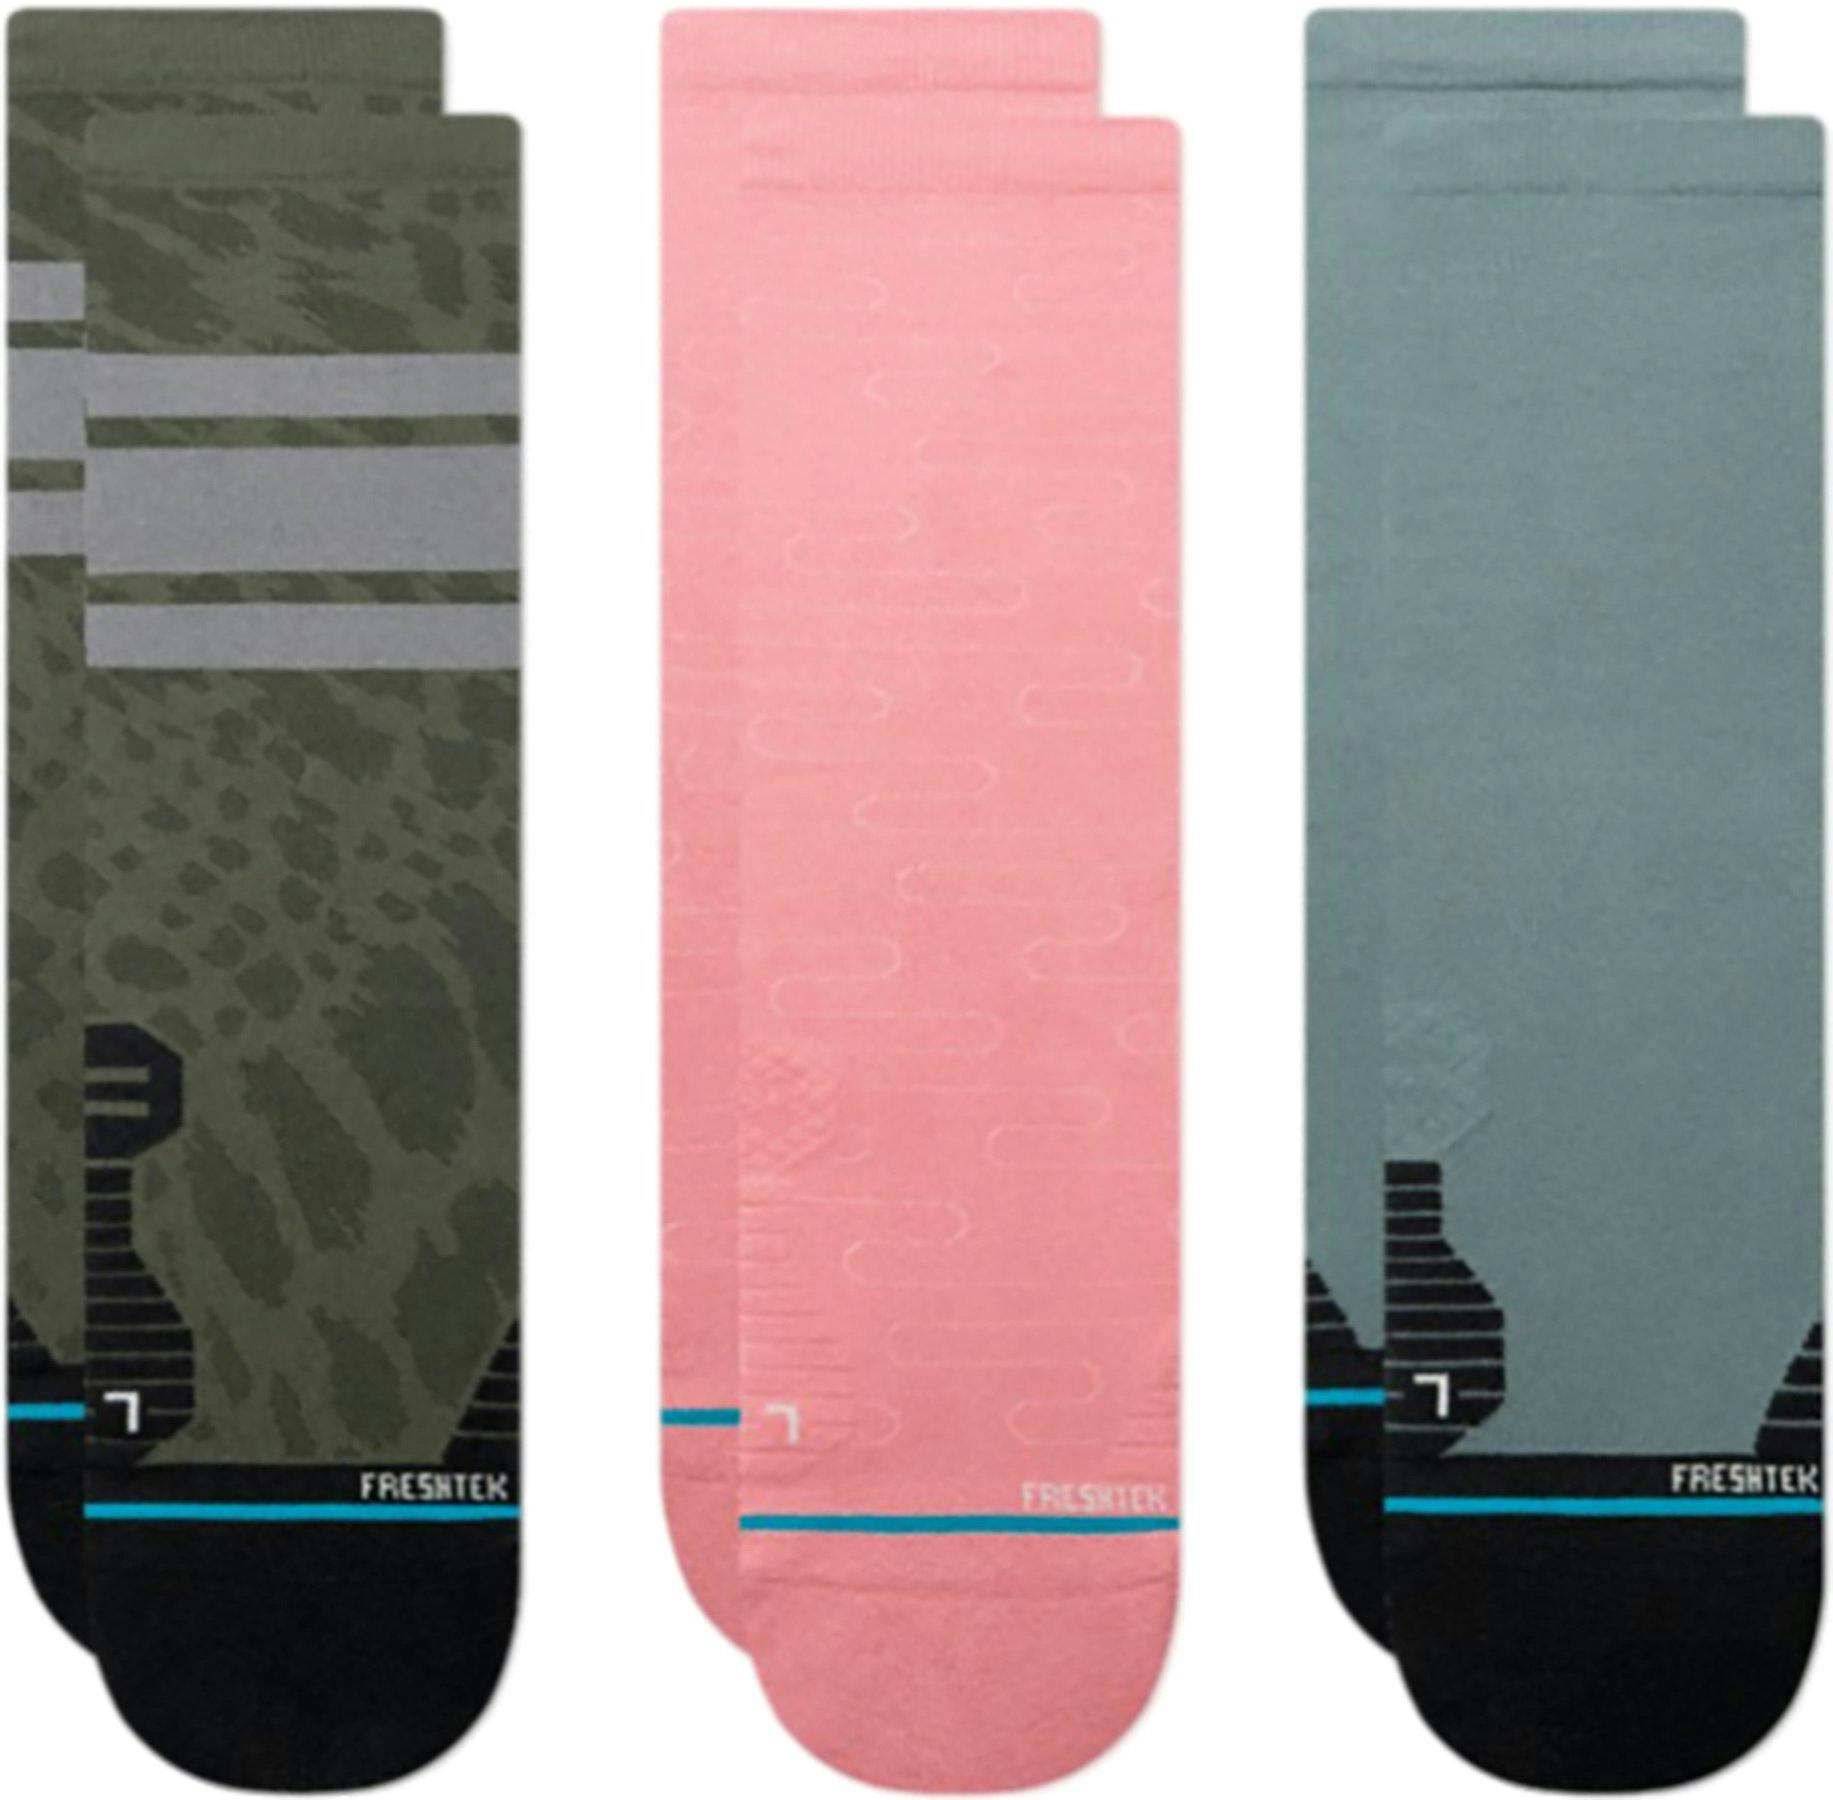 Product image for Dimensions 3 Pack Crew Socks - Unisex